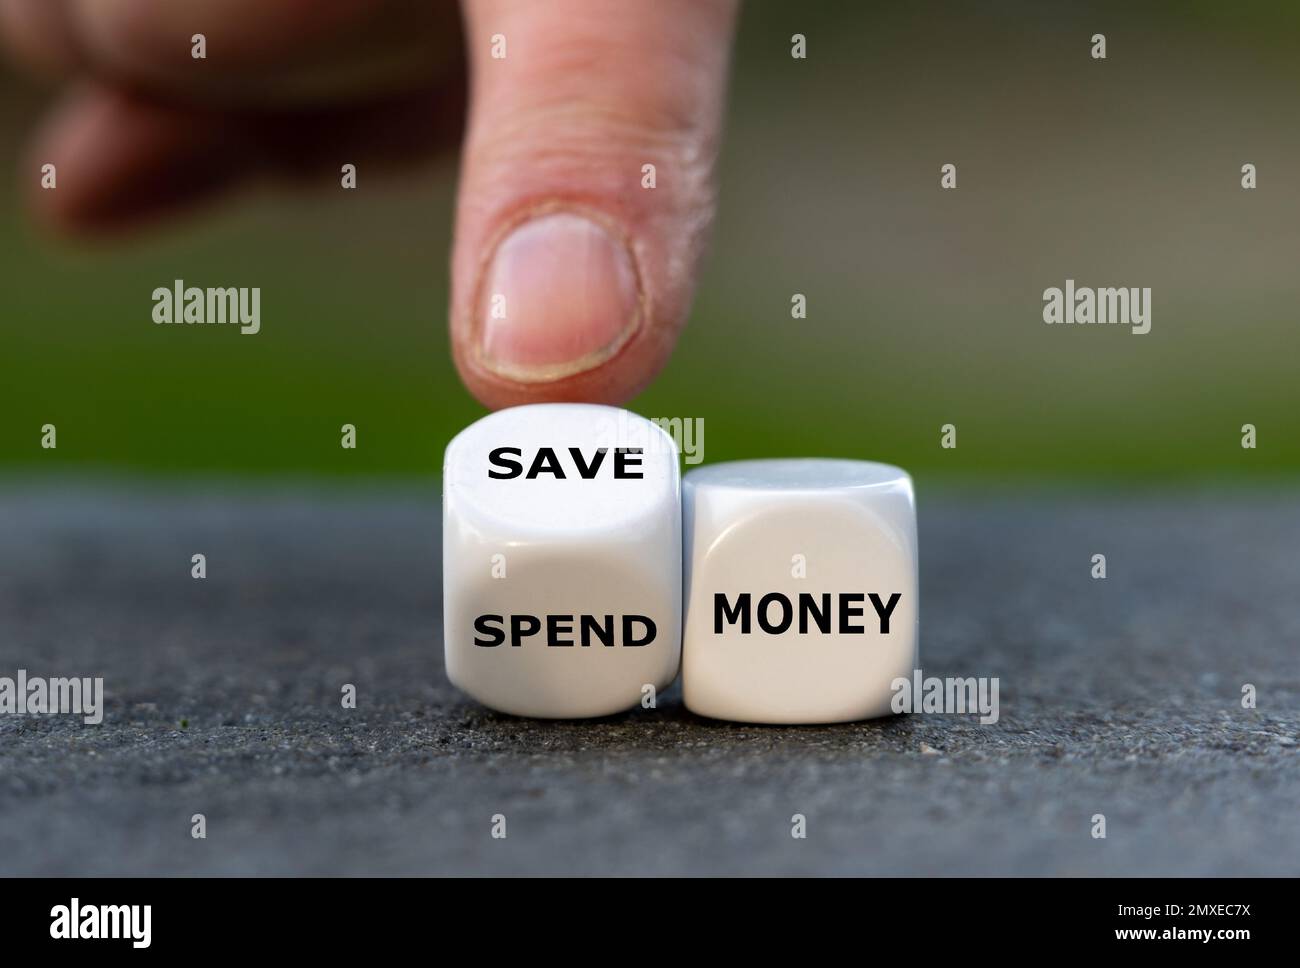 Hand turns dice and changes the expression 'spend money' to 'save money'. Stock Photo